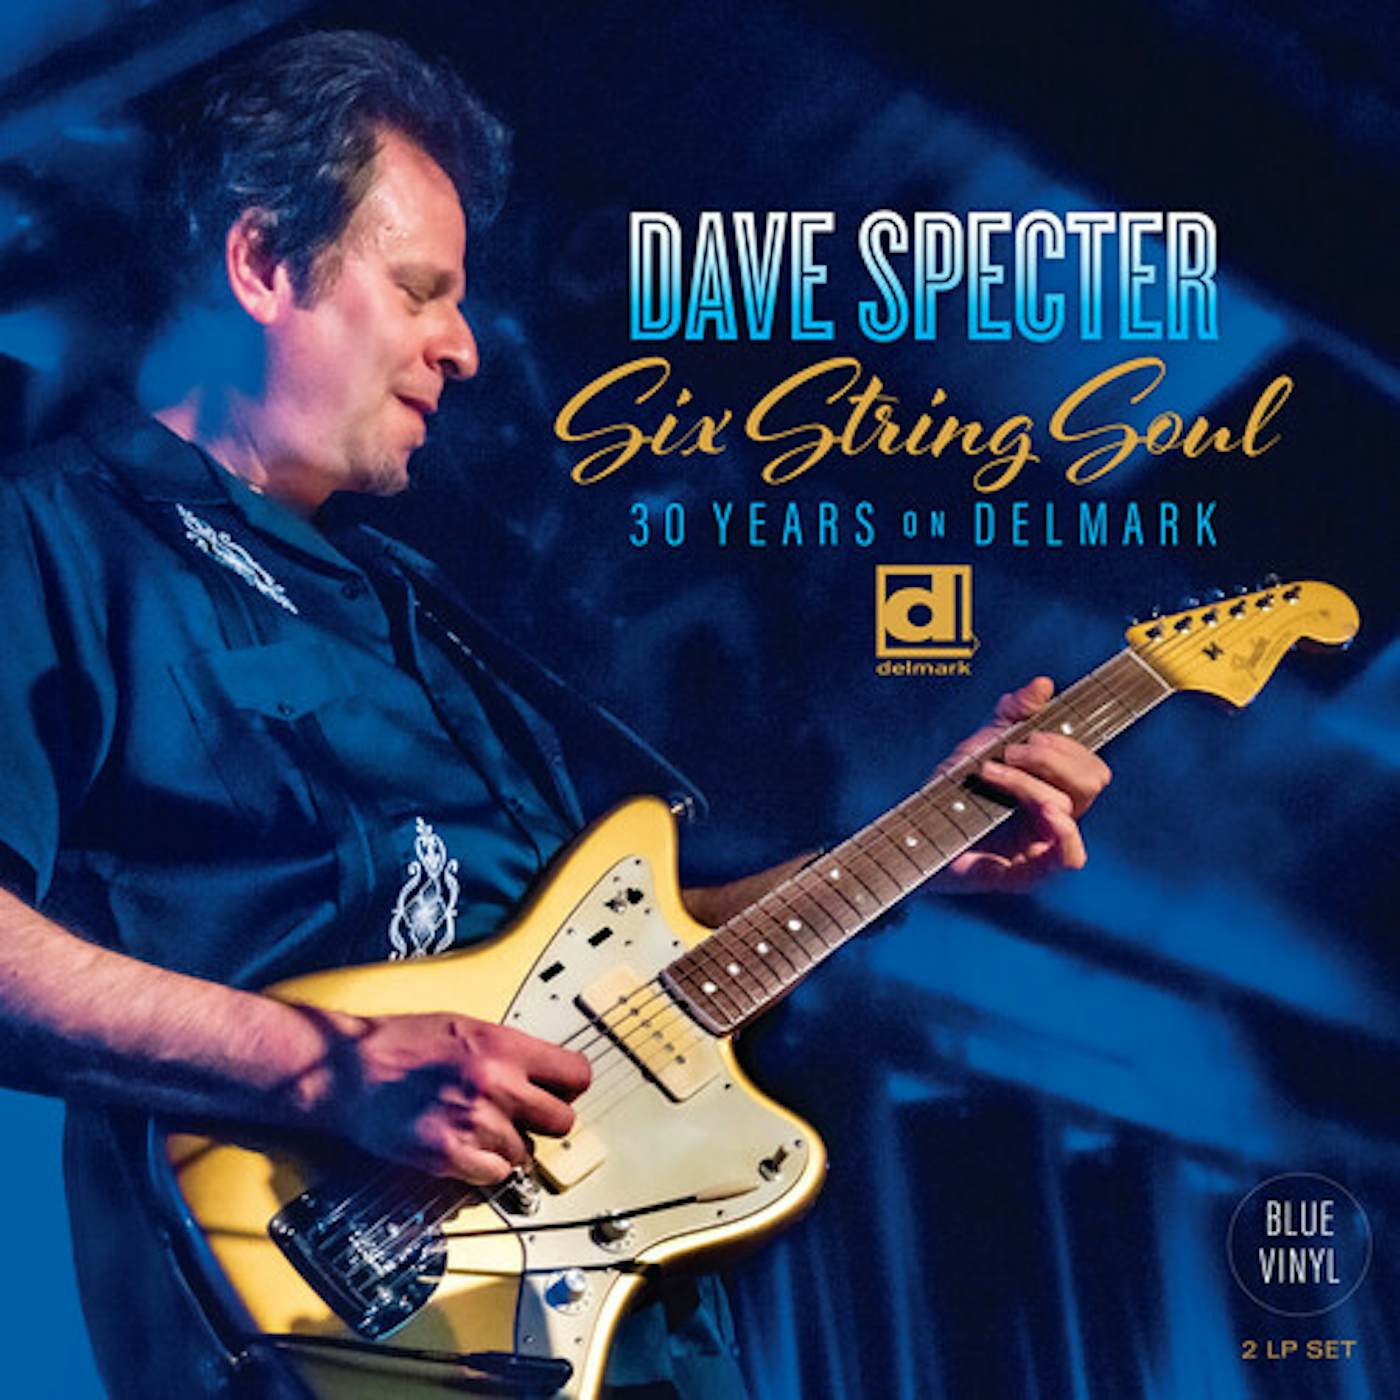 Dave Specter SIX STRING SOUL: 30 YEARS ON DELMARK - BLUE Vinyl Record